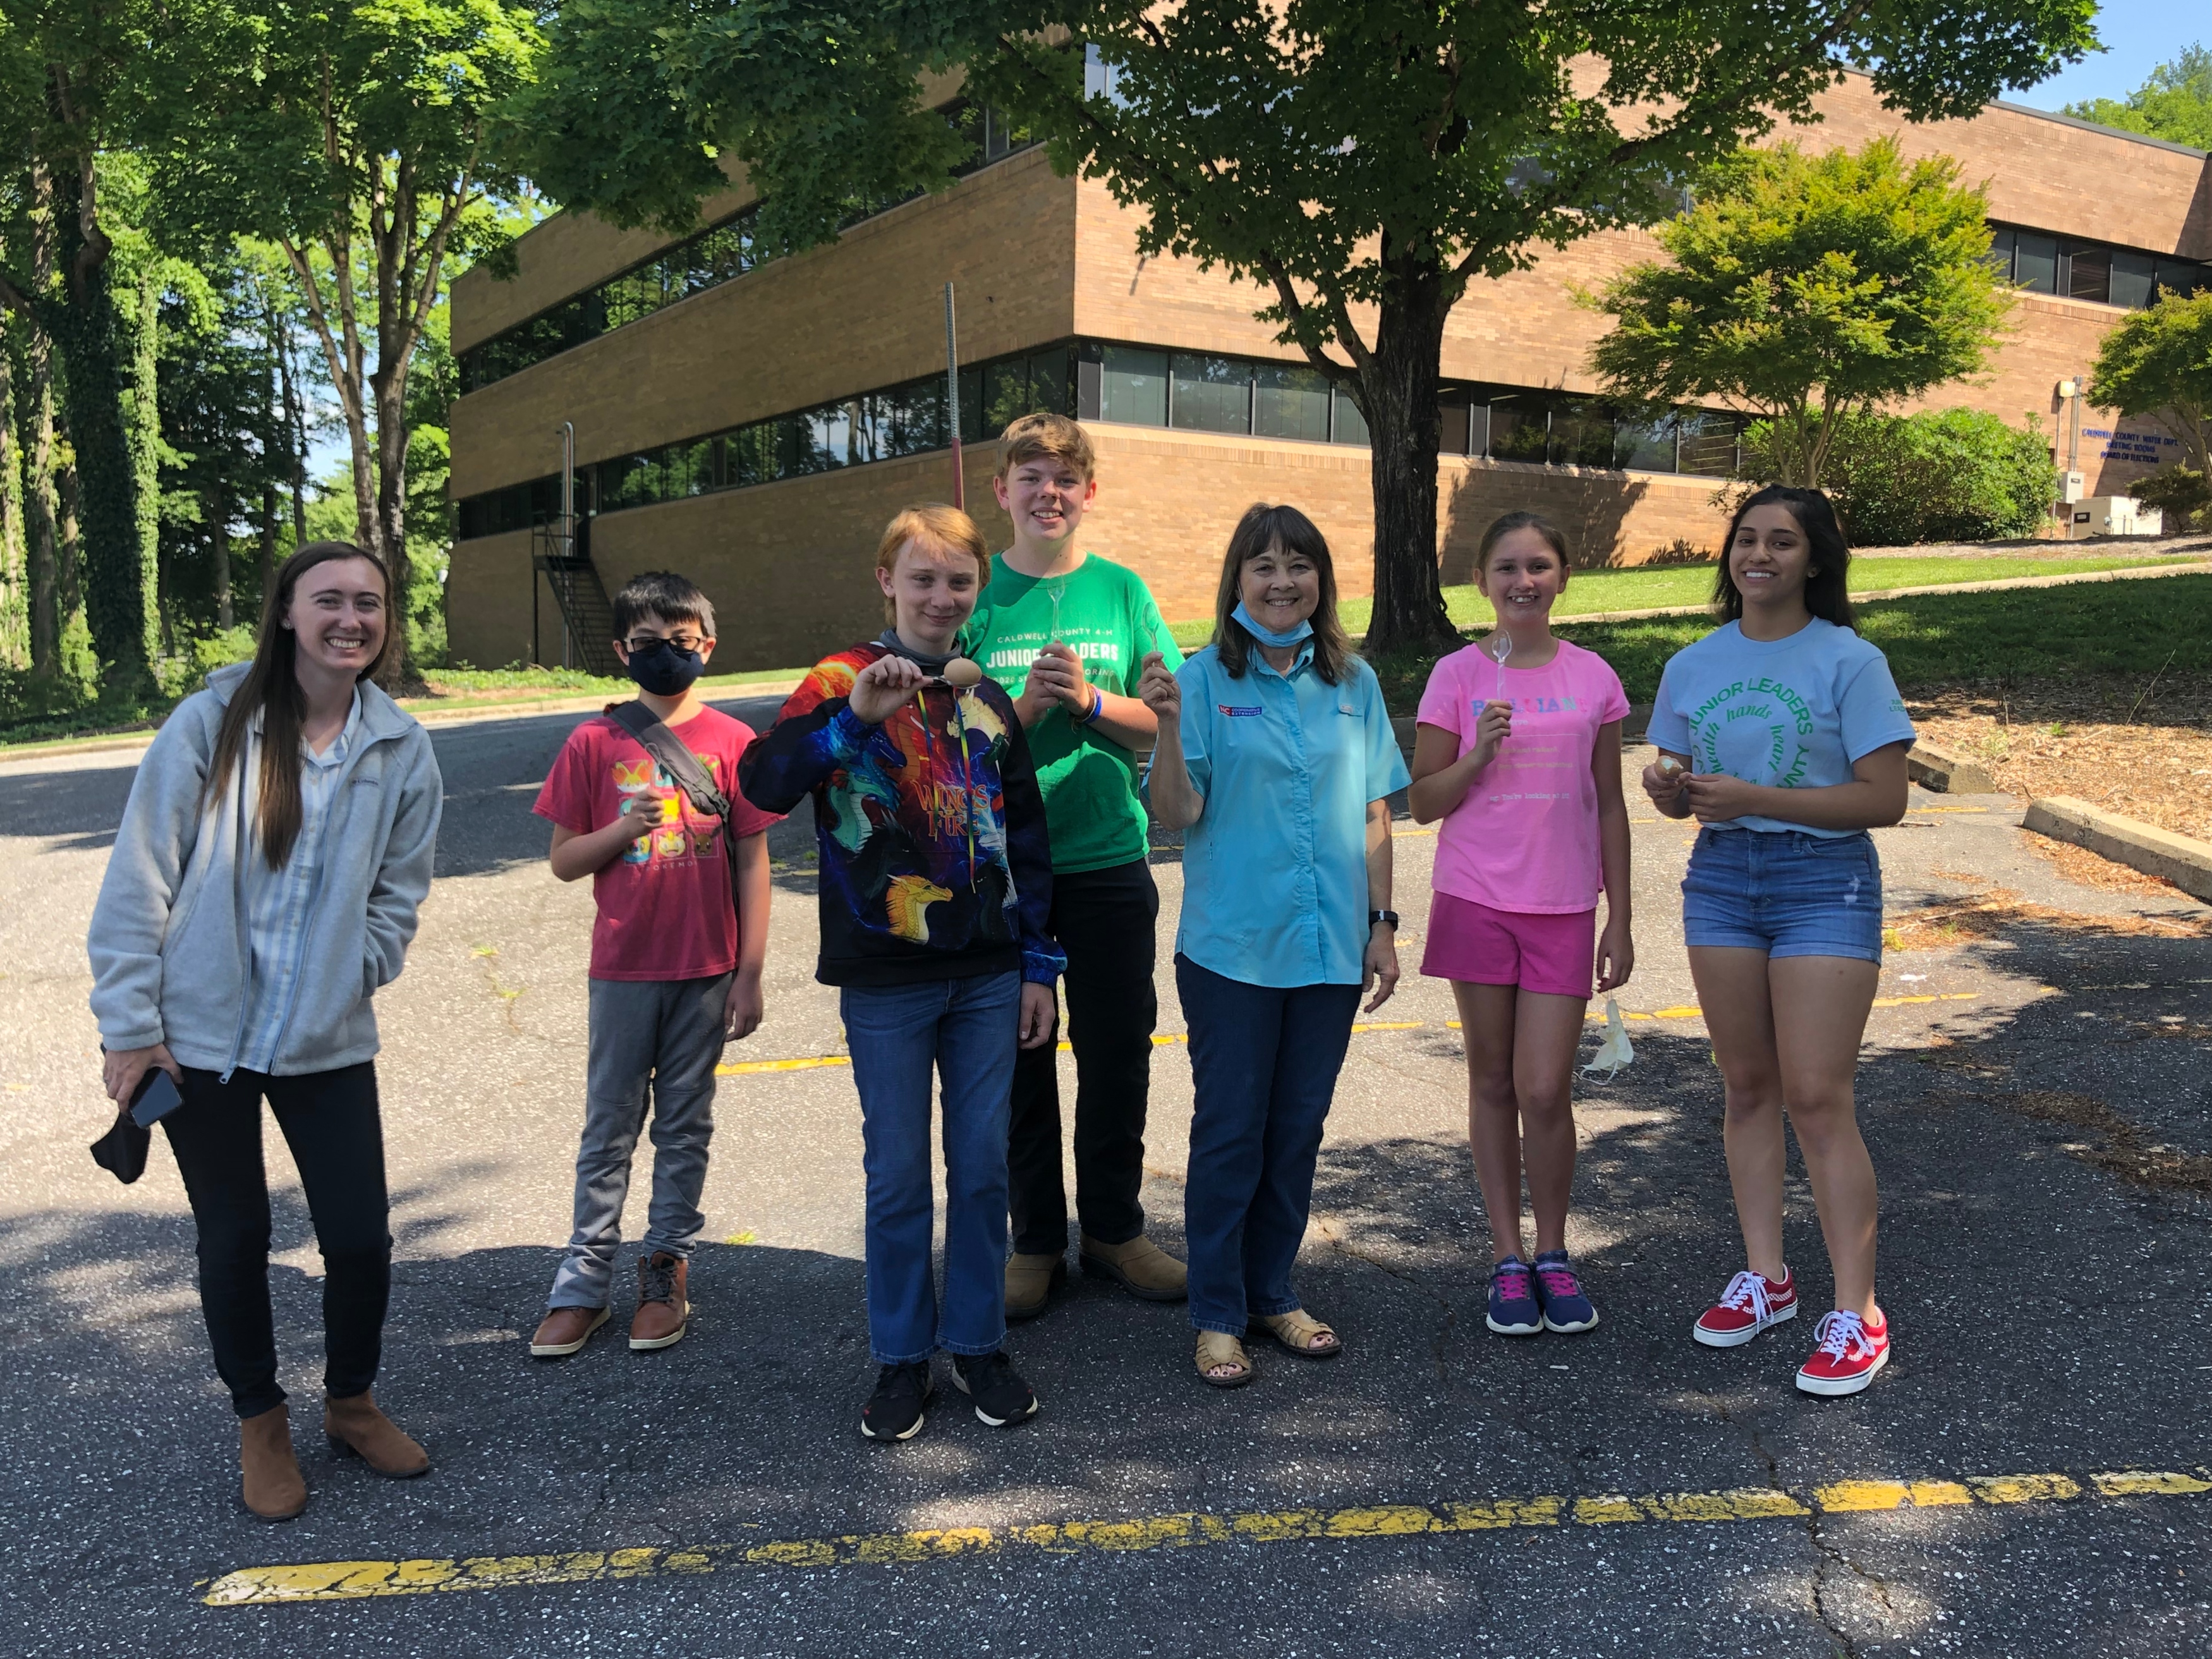 Participants at Caldwell County 4-H’s “Egg-Cellent Poultry” camp pose after an egg and spoon race. In addition to learning about poultry and food science, games were a highlight for youth and teen leaders who attended the program in July 2021.